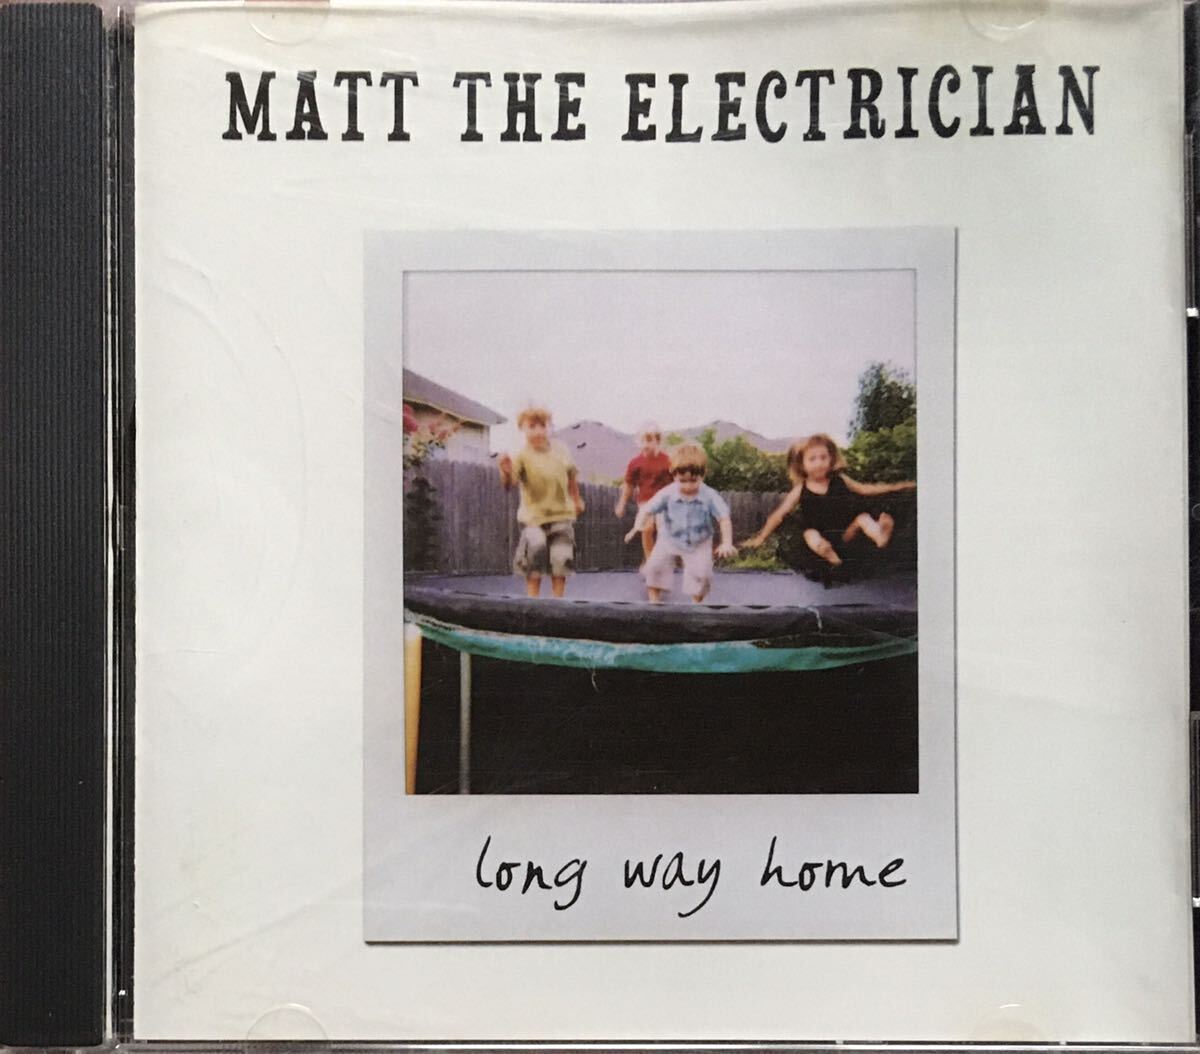 Matt The Electrician [Long Way Home]テキサス / シンガーソングライター / フォークロック / カントリーロック / The Recentments_画像1